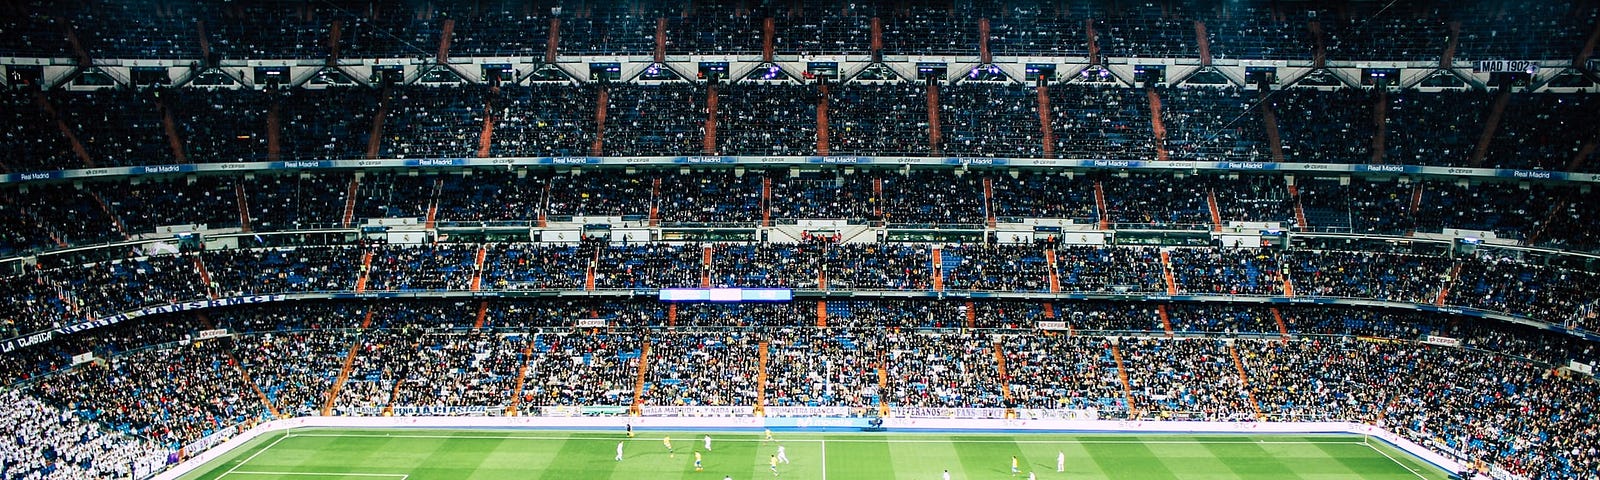 IMAGE: A view of the Santiago Bernabéu stadium in Madrid during a soccer match